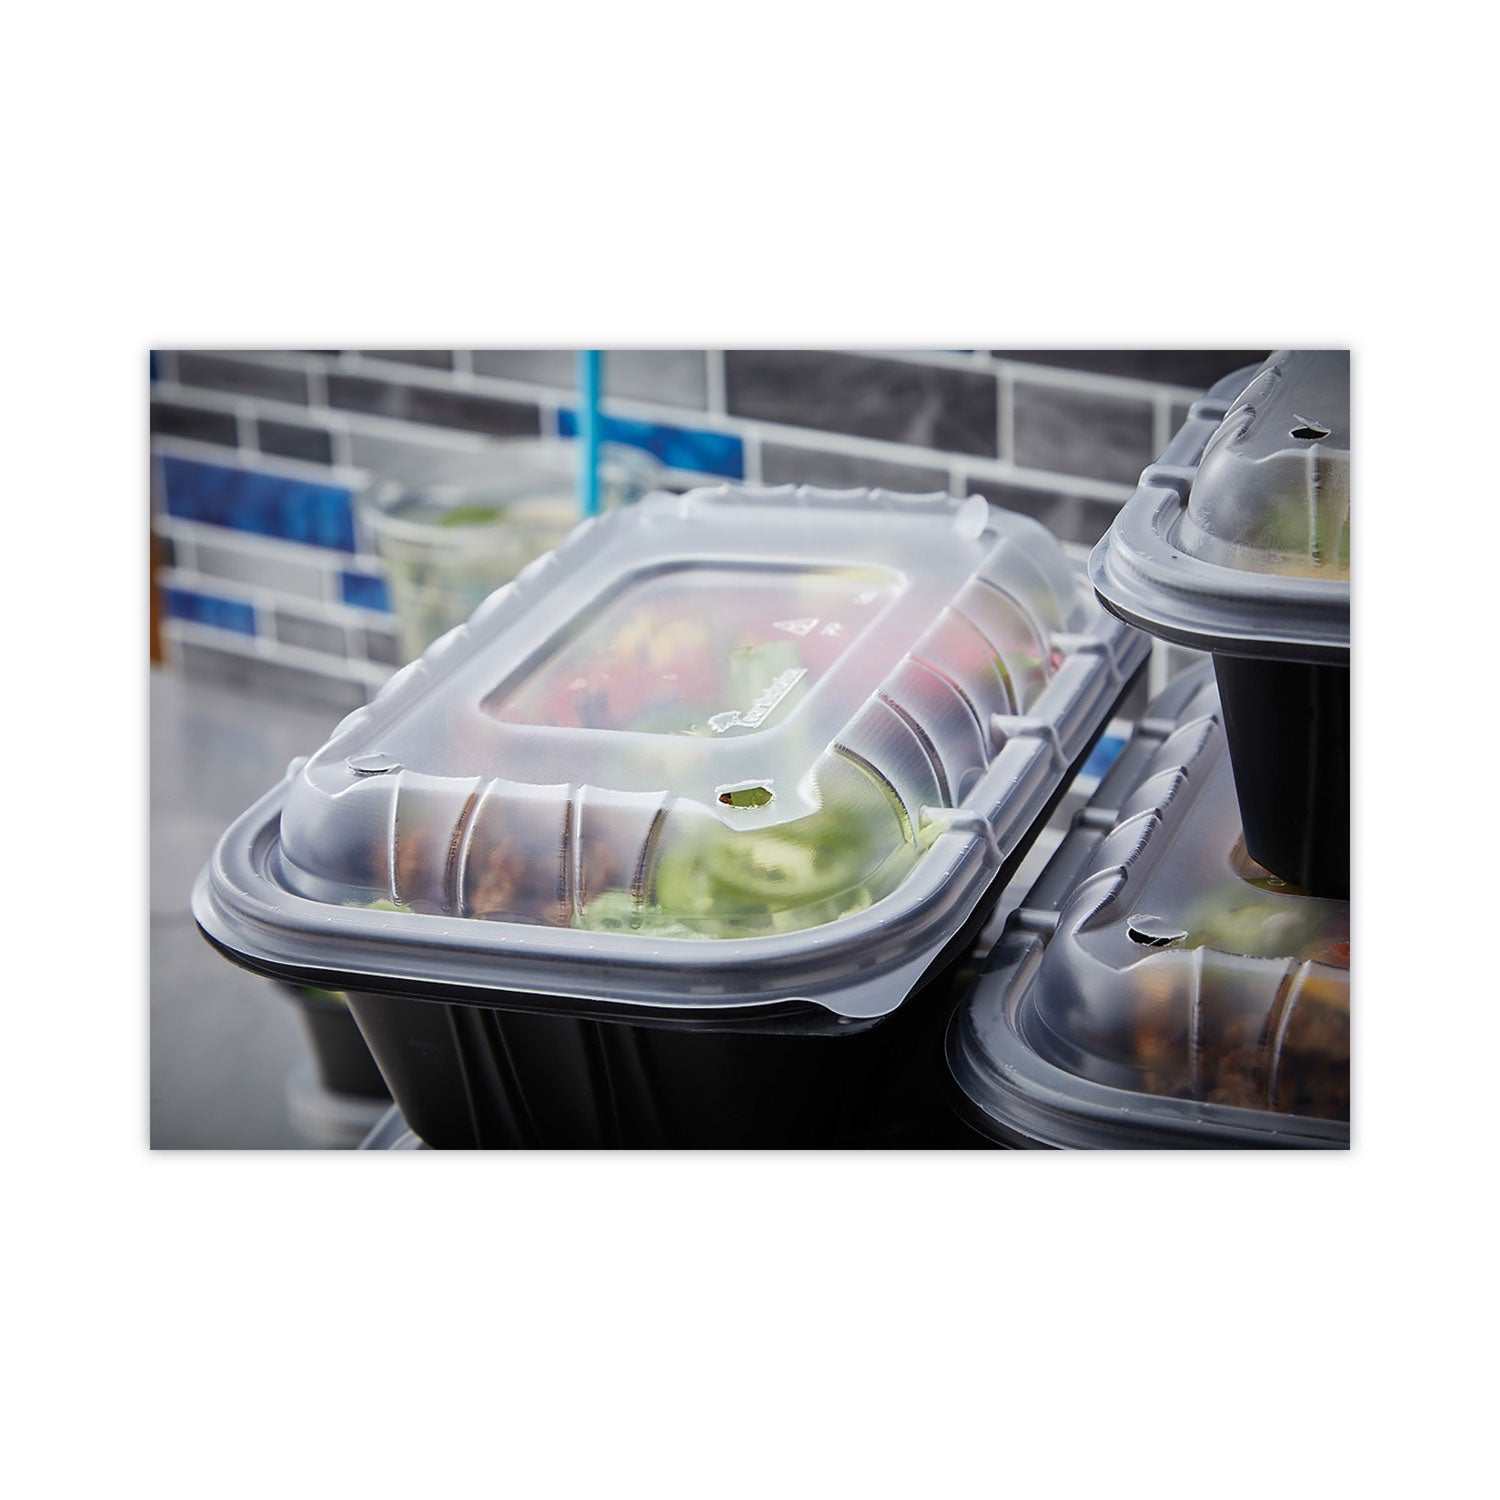 earthchoice-entree2go-takeout-container-32-oz-866-x-575-x-272-black-plastic-300-carton_pctycnb9x632000 - 3